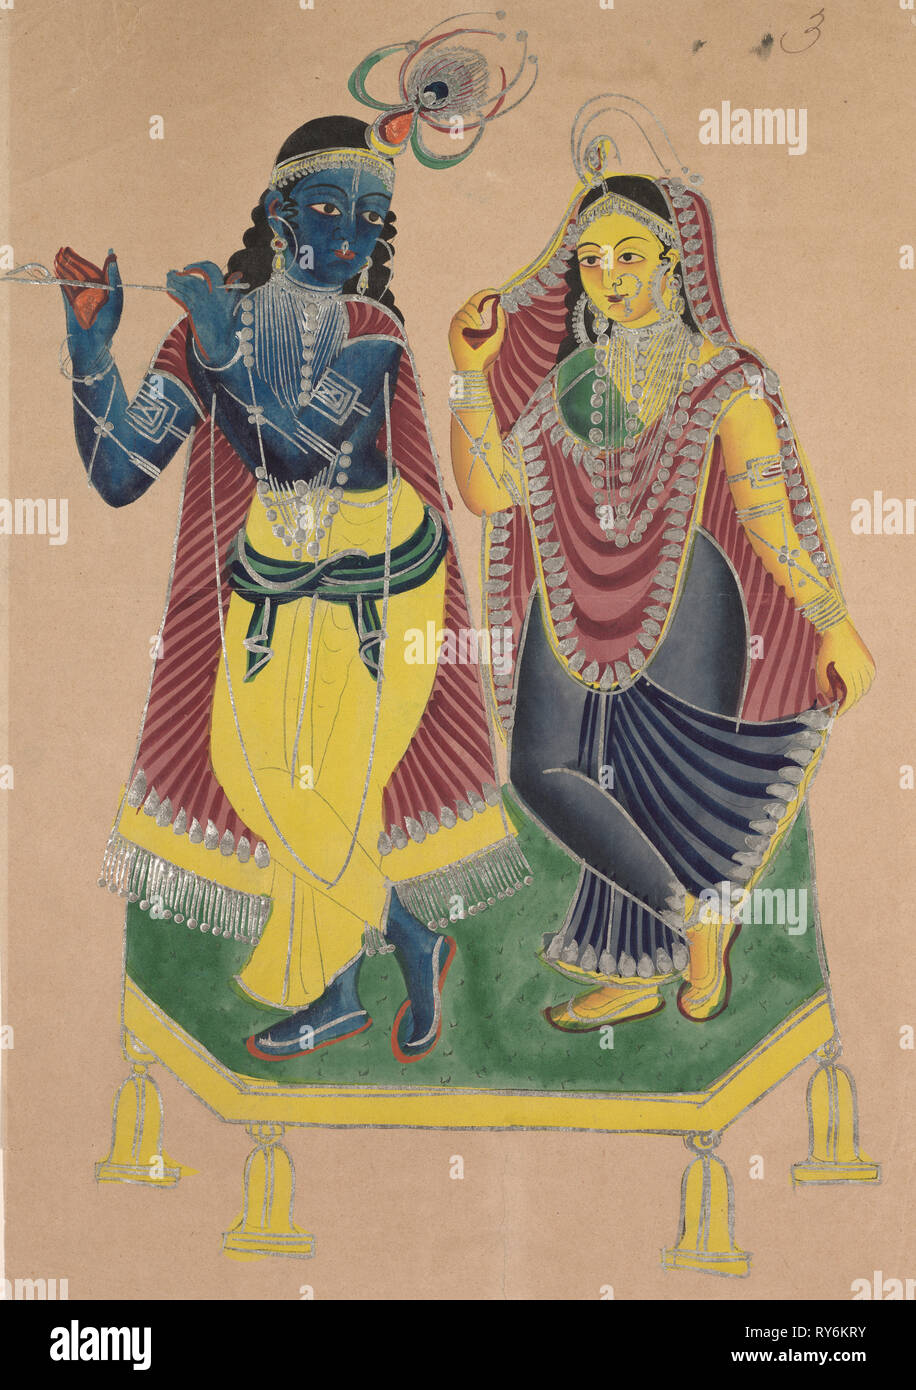 Radha and Krishna, 1800s. India, Calcutta, Kalighat painting, 19th century. Black ink, color and silver paint, and graphite underdrawing on paper; painting only: 40.4 x 27.9 cm (15 7/8 x 11 in Stock Photo